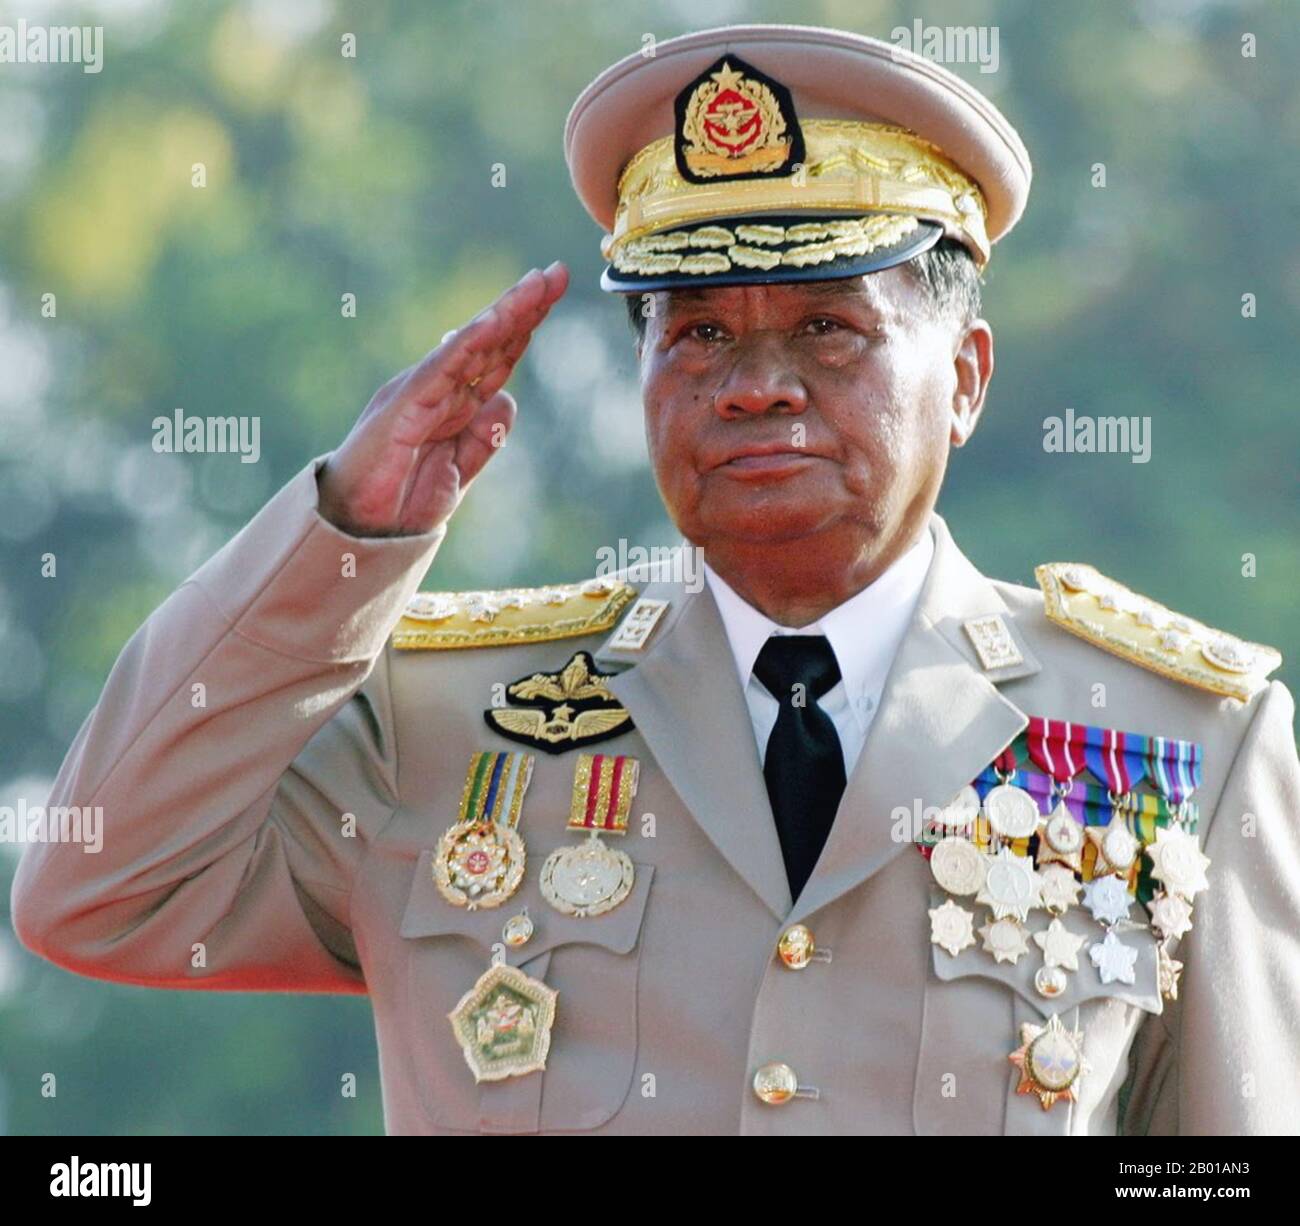 Burma/Myanmar: Than Shwe (3 February 1933- ), Chairman of the State Peace and Development Council of Myanmar, 1992-2011.  Senior General Than Shwe is a Burmese military leader and politician who was chairman of the State Peace and Development Council (SPDC) from 1992 to 2011. During the period, he held key positions of power including commander-in-chief of the Myanmar Armed Forces (Tatmadaw) and head of Union Solidarity and Development Association. In 2011, he officially resigned from his position as head of state, in favor of his hand-picked successor, Thein Sein. Stock Photo